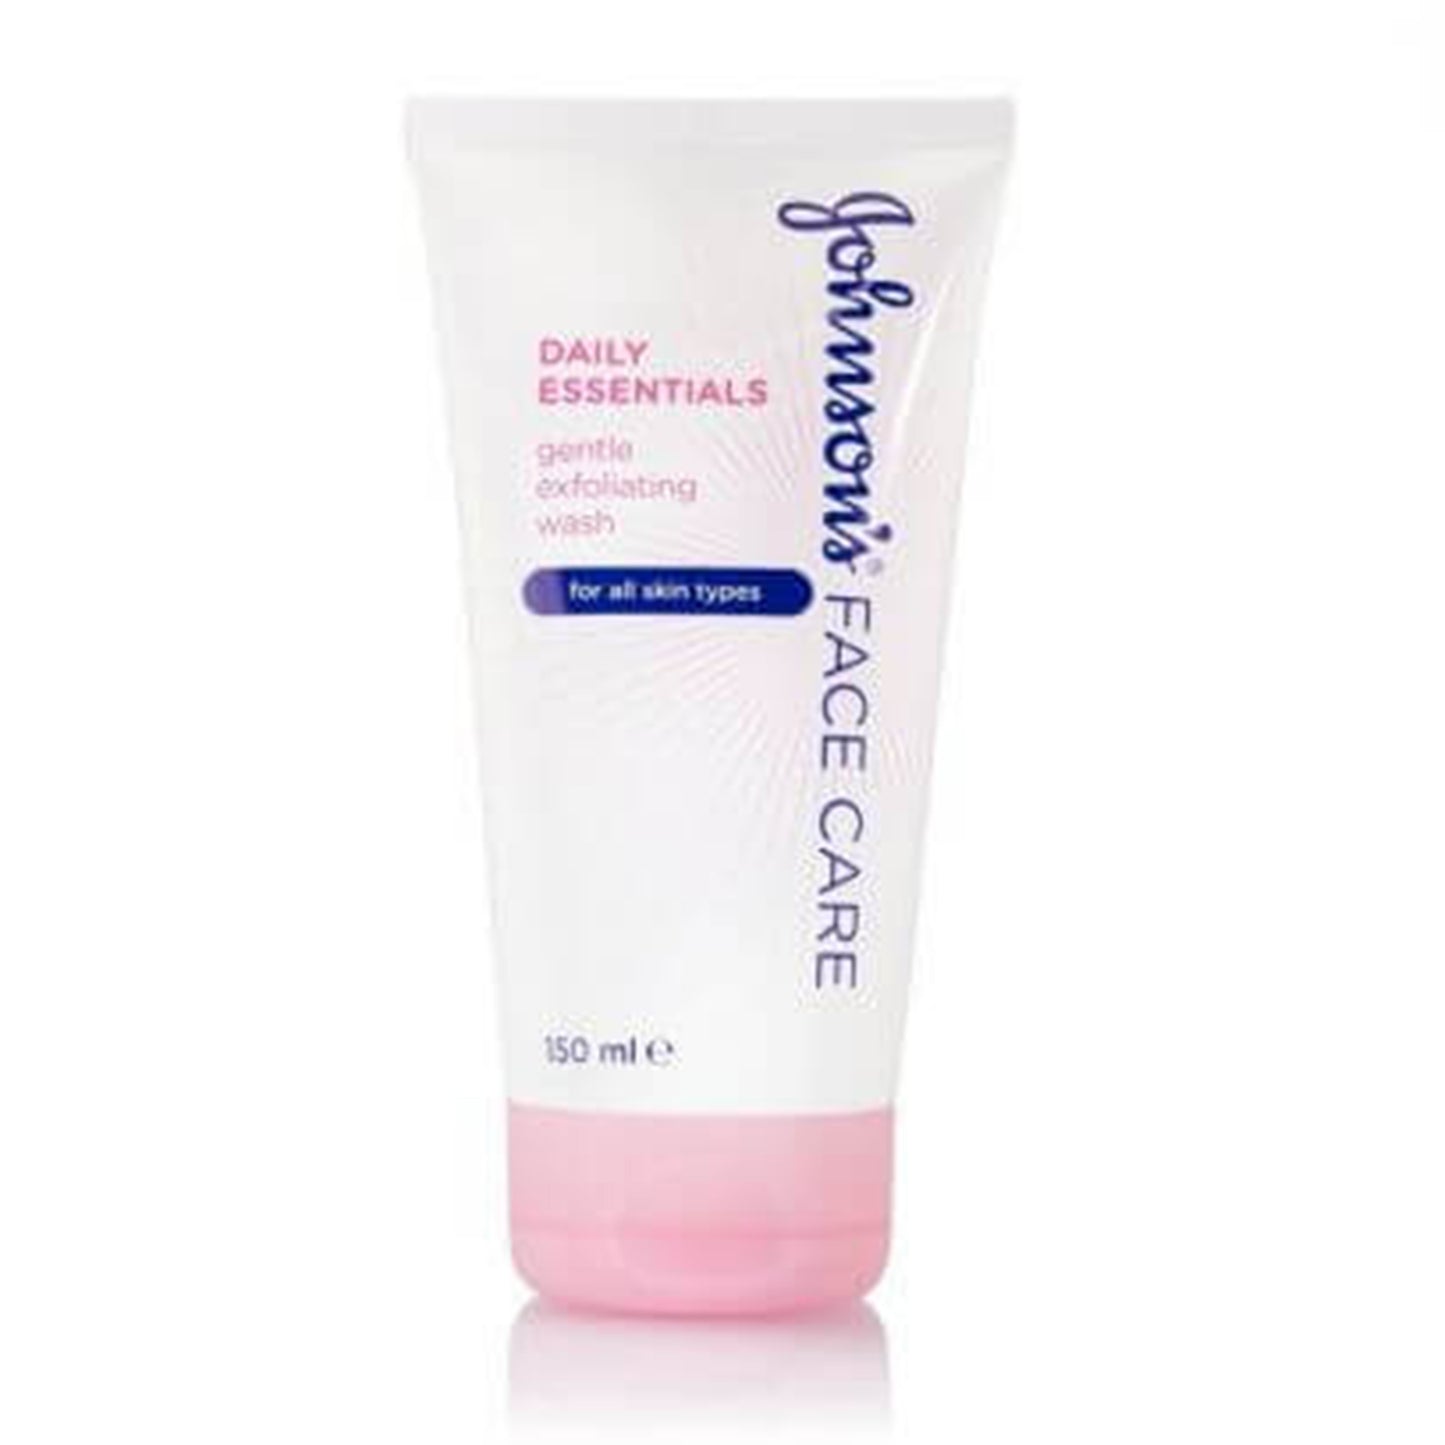 JOHNSON'S - FACE CARE DAILY ESSENTIALS GENTLE EXFOLIATING WASH - 150ML